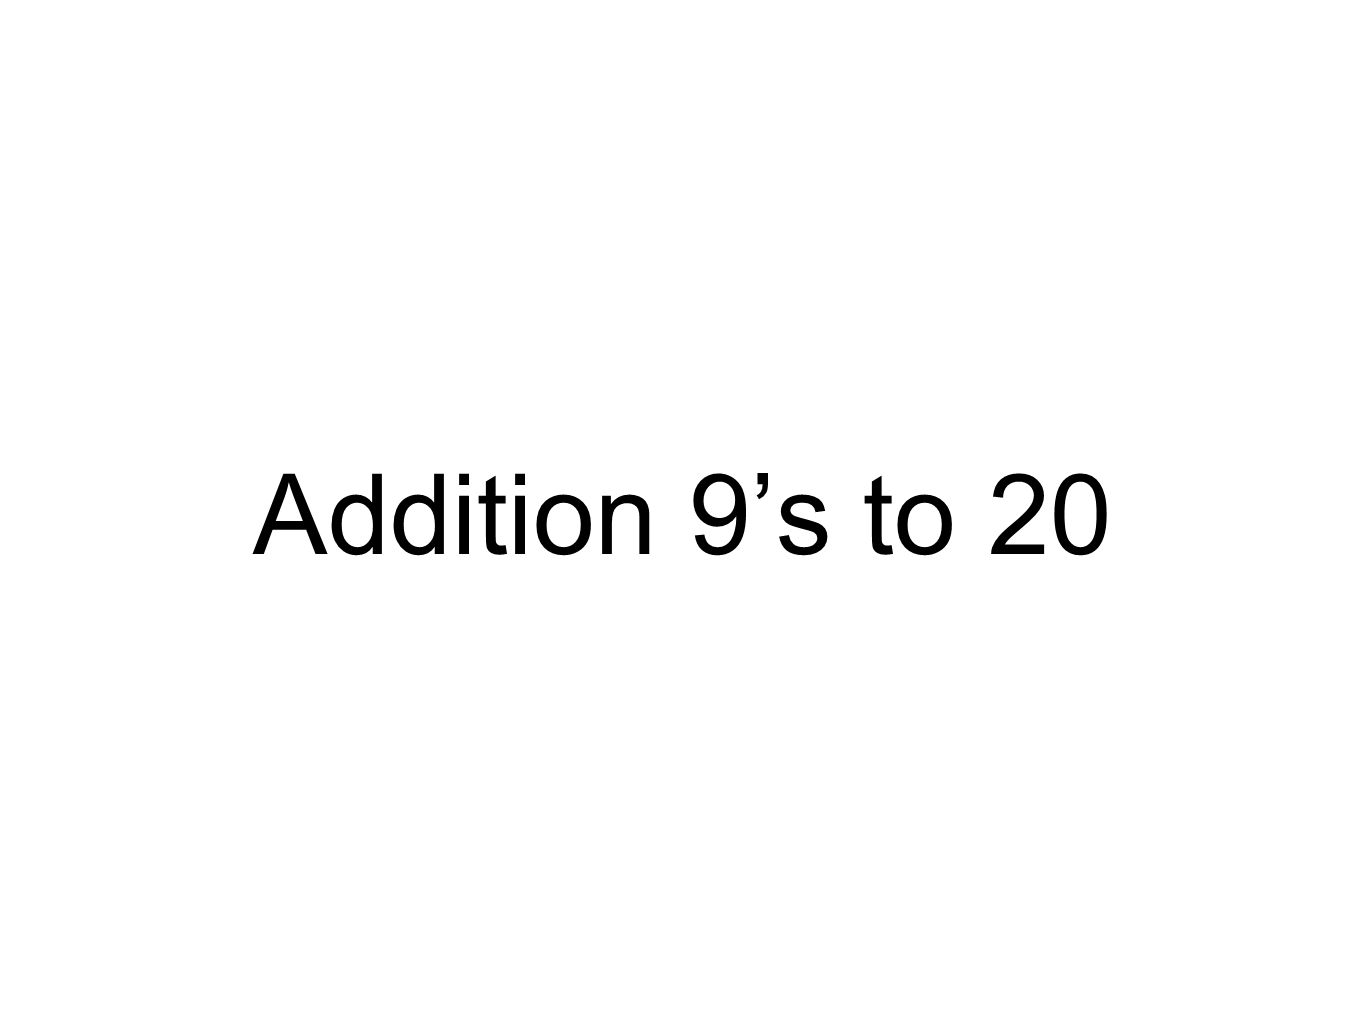 Addition 9’s to 20